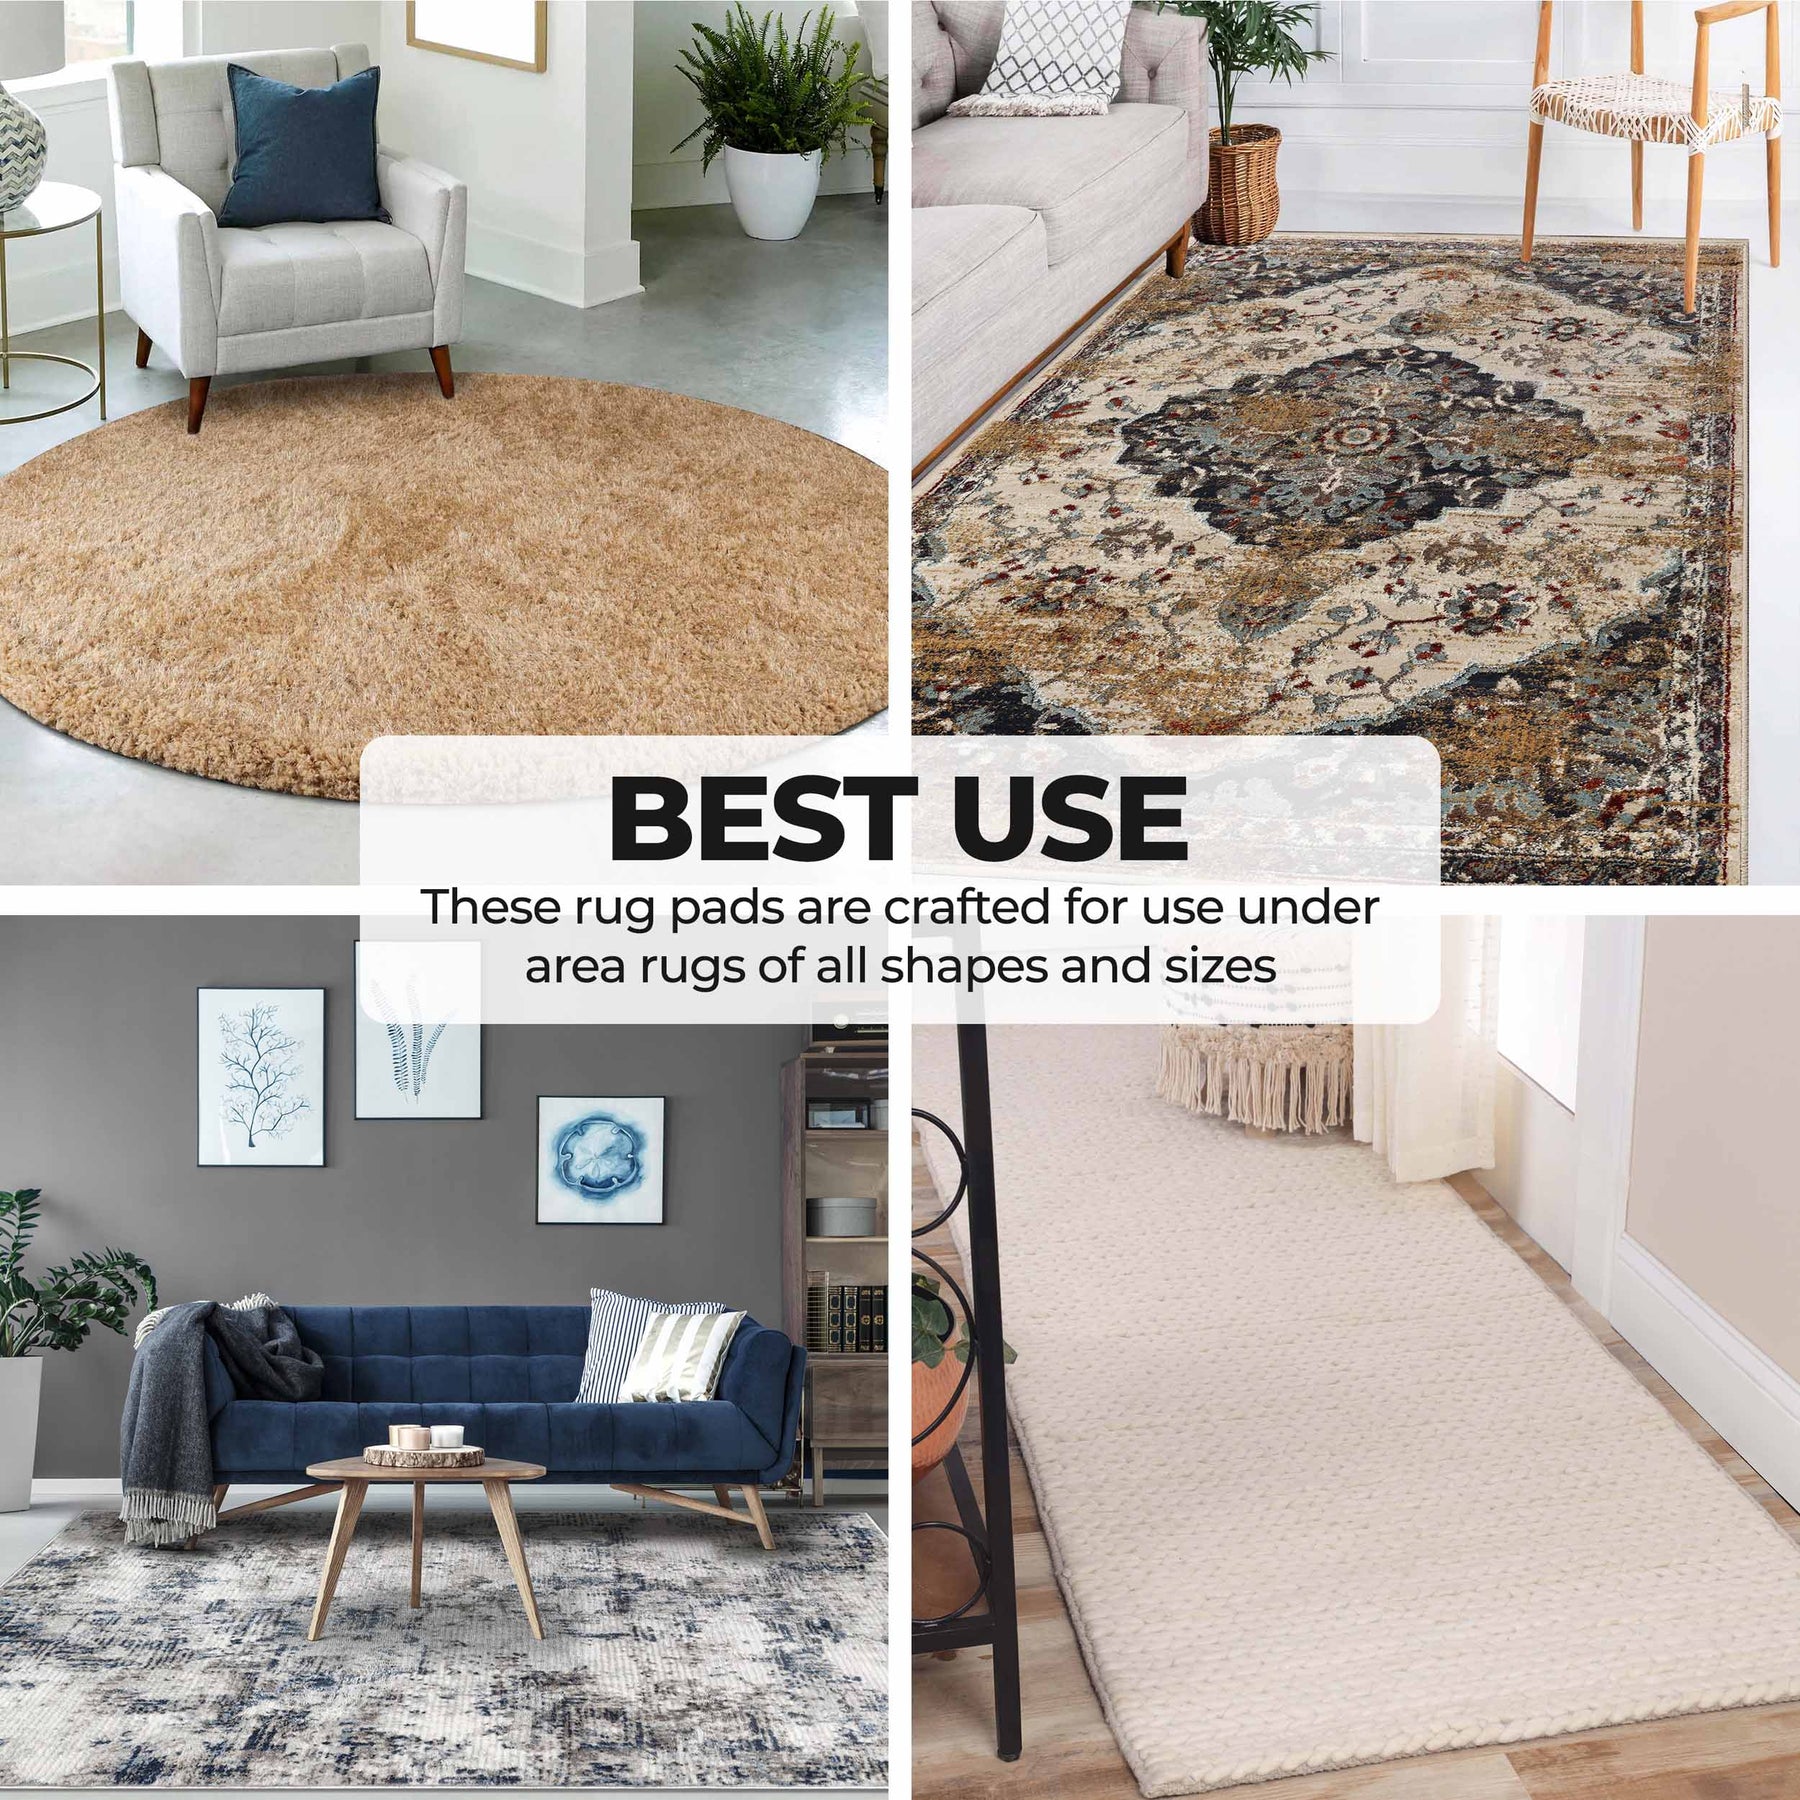 Slip-Stop Premium Low Profile Non-Slip Rug Pad for Area Rugs and Runner  Rugs, USA-Made Gripper Rug Pad Keeps Rugs in Place On Carpet and Hardwood